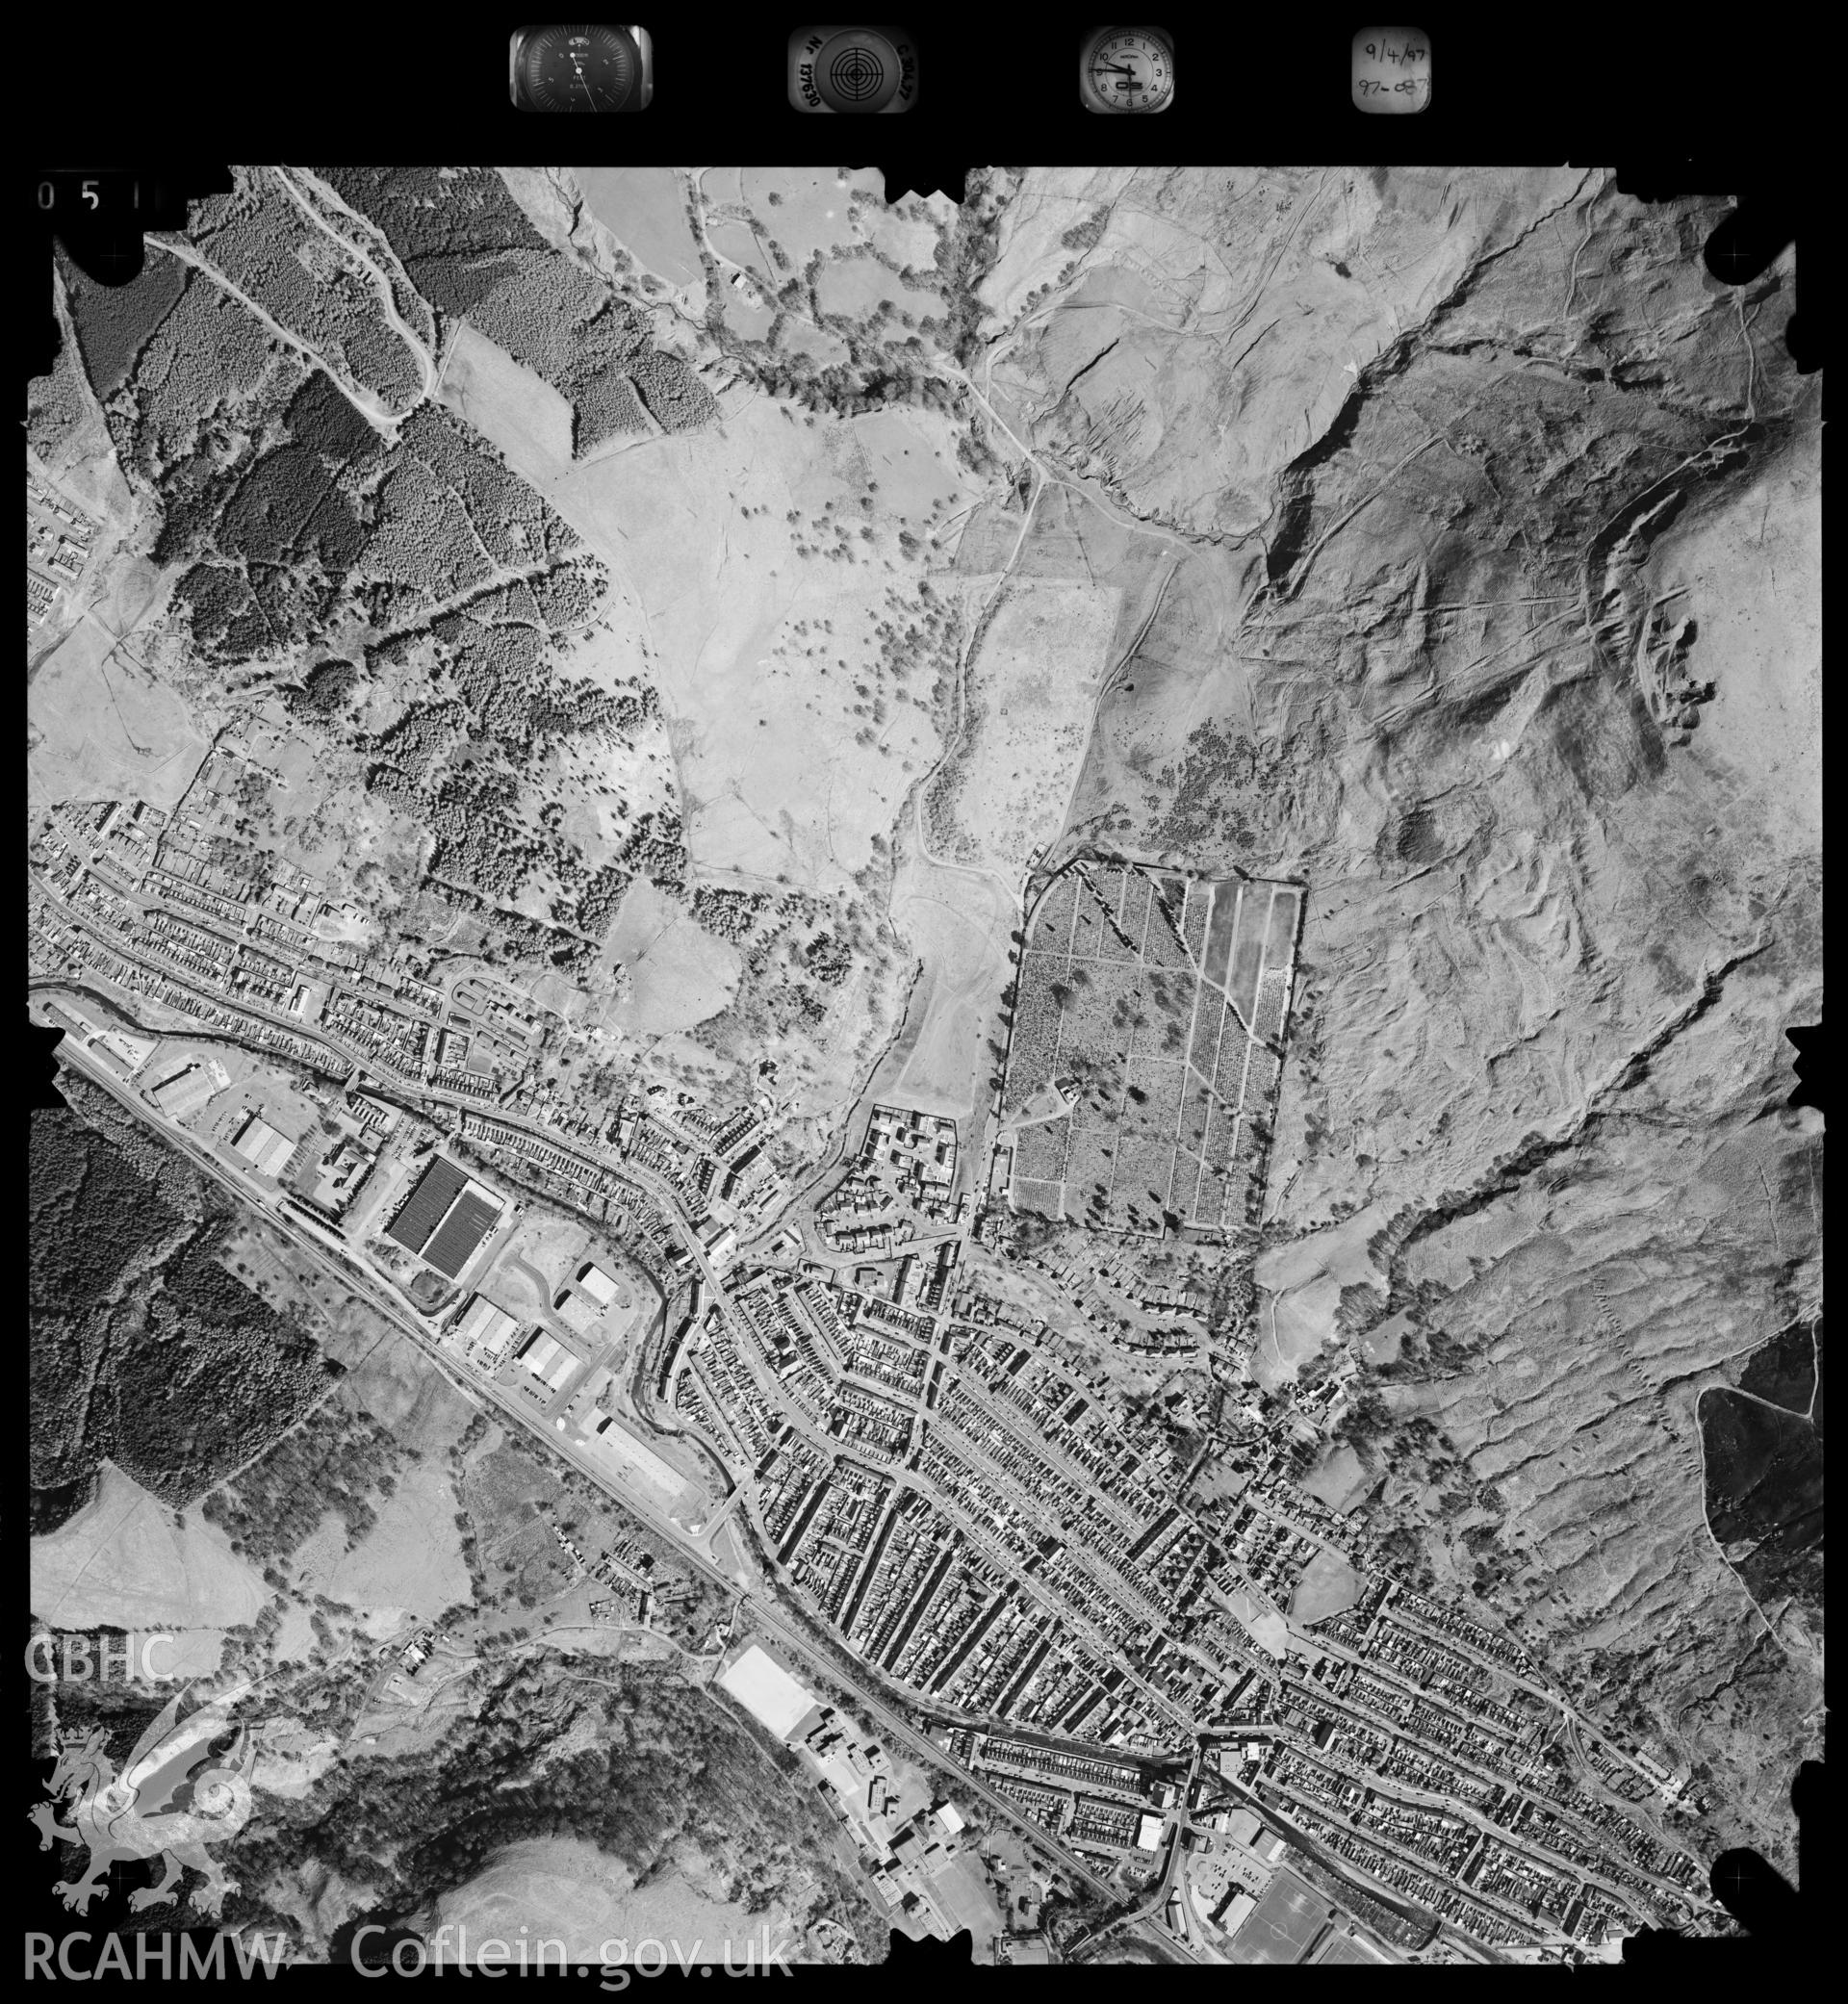 Digitized copy of an aerial photograph showing the Treorchy area, taken by Ordnance Survey, April 1997.